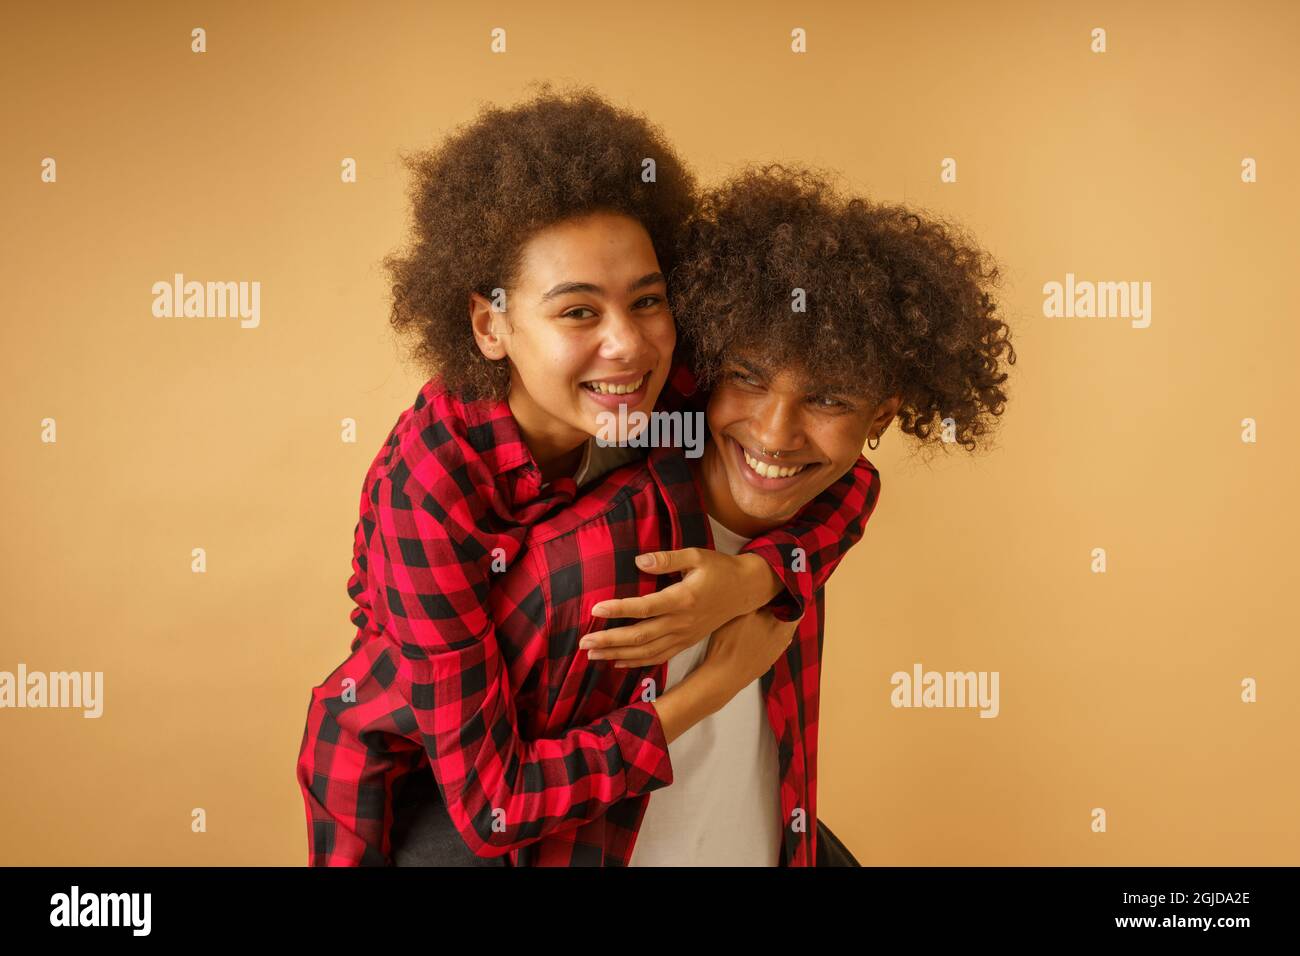 Happy and carefree afro boyfriend and girlfriend play together Stock Photo